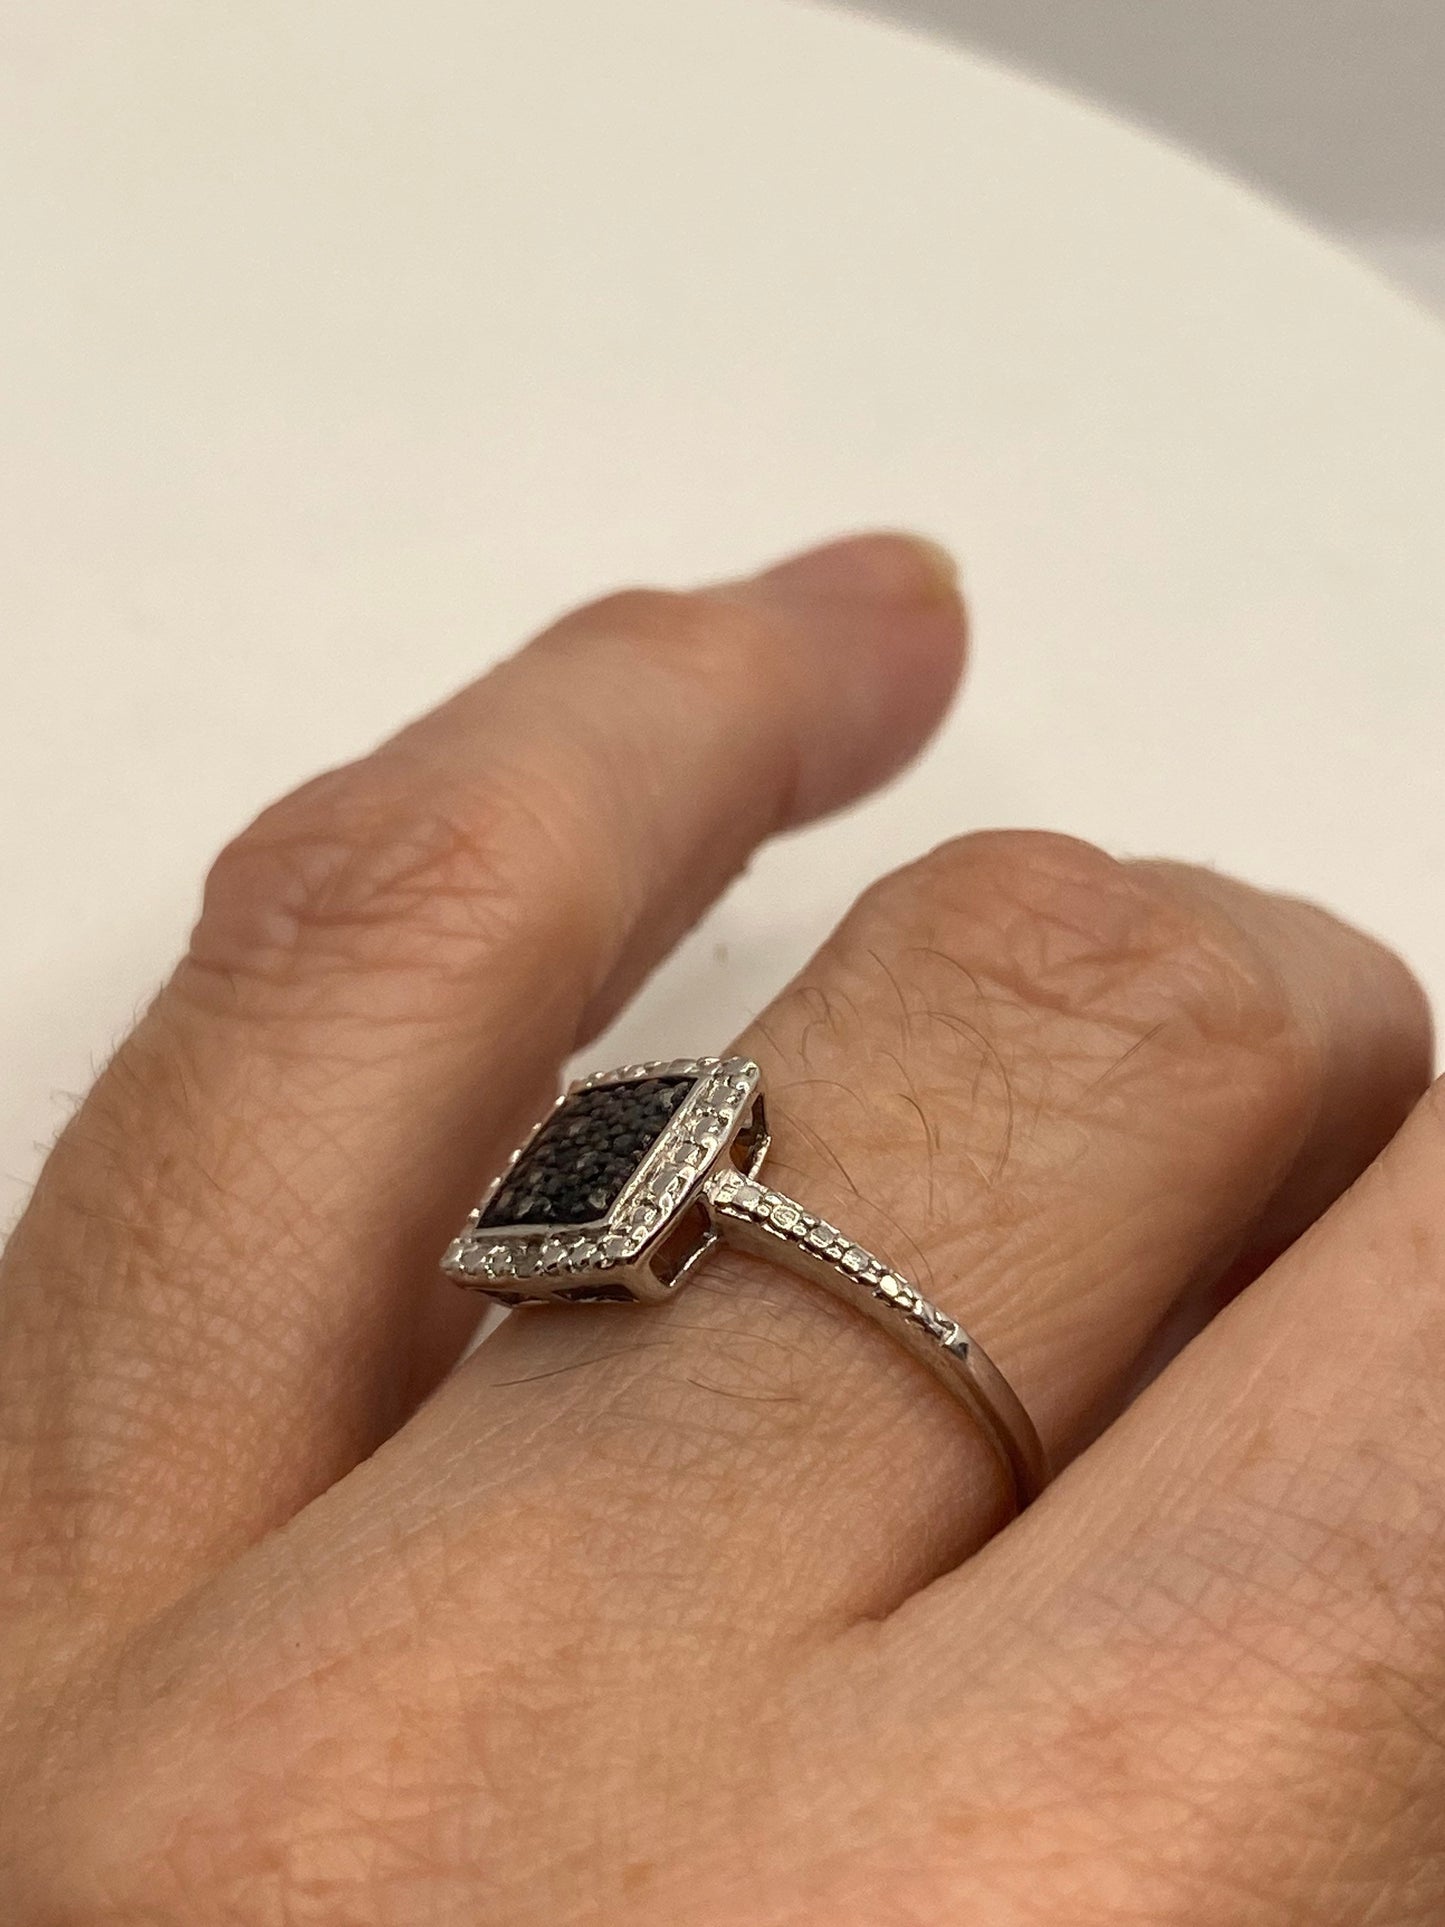 Vintage Black and White Diamond 925 Sterling Silver Wedding Band Ring